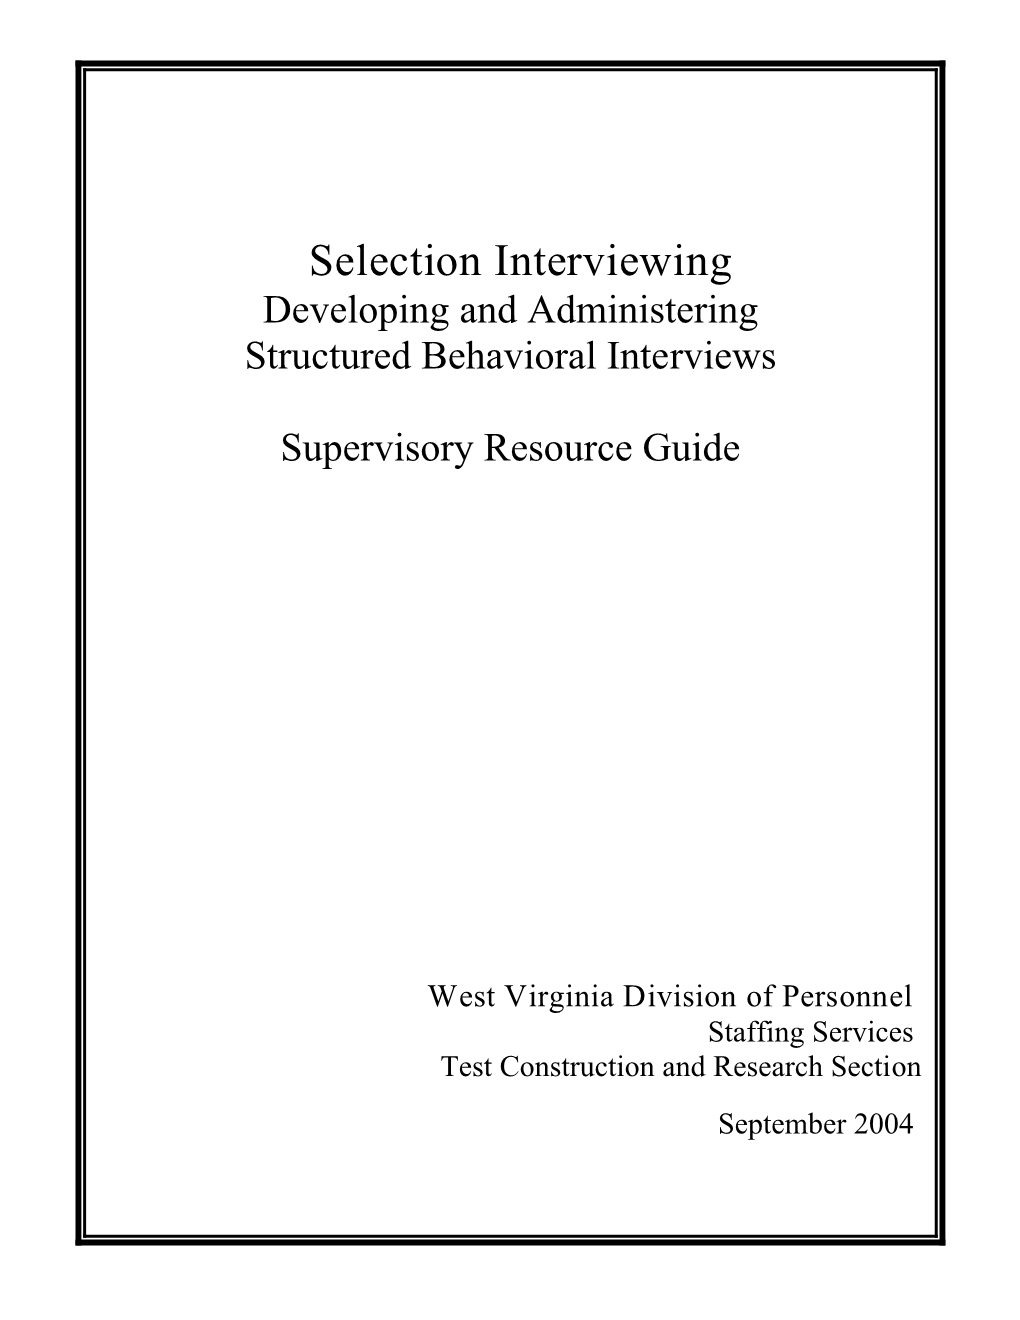 Selection Interviewing Developing and Administering Structured Behavioral Interviews